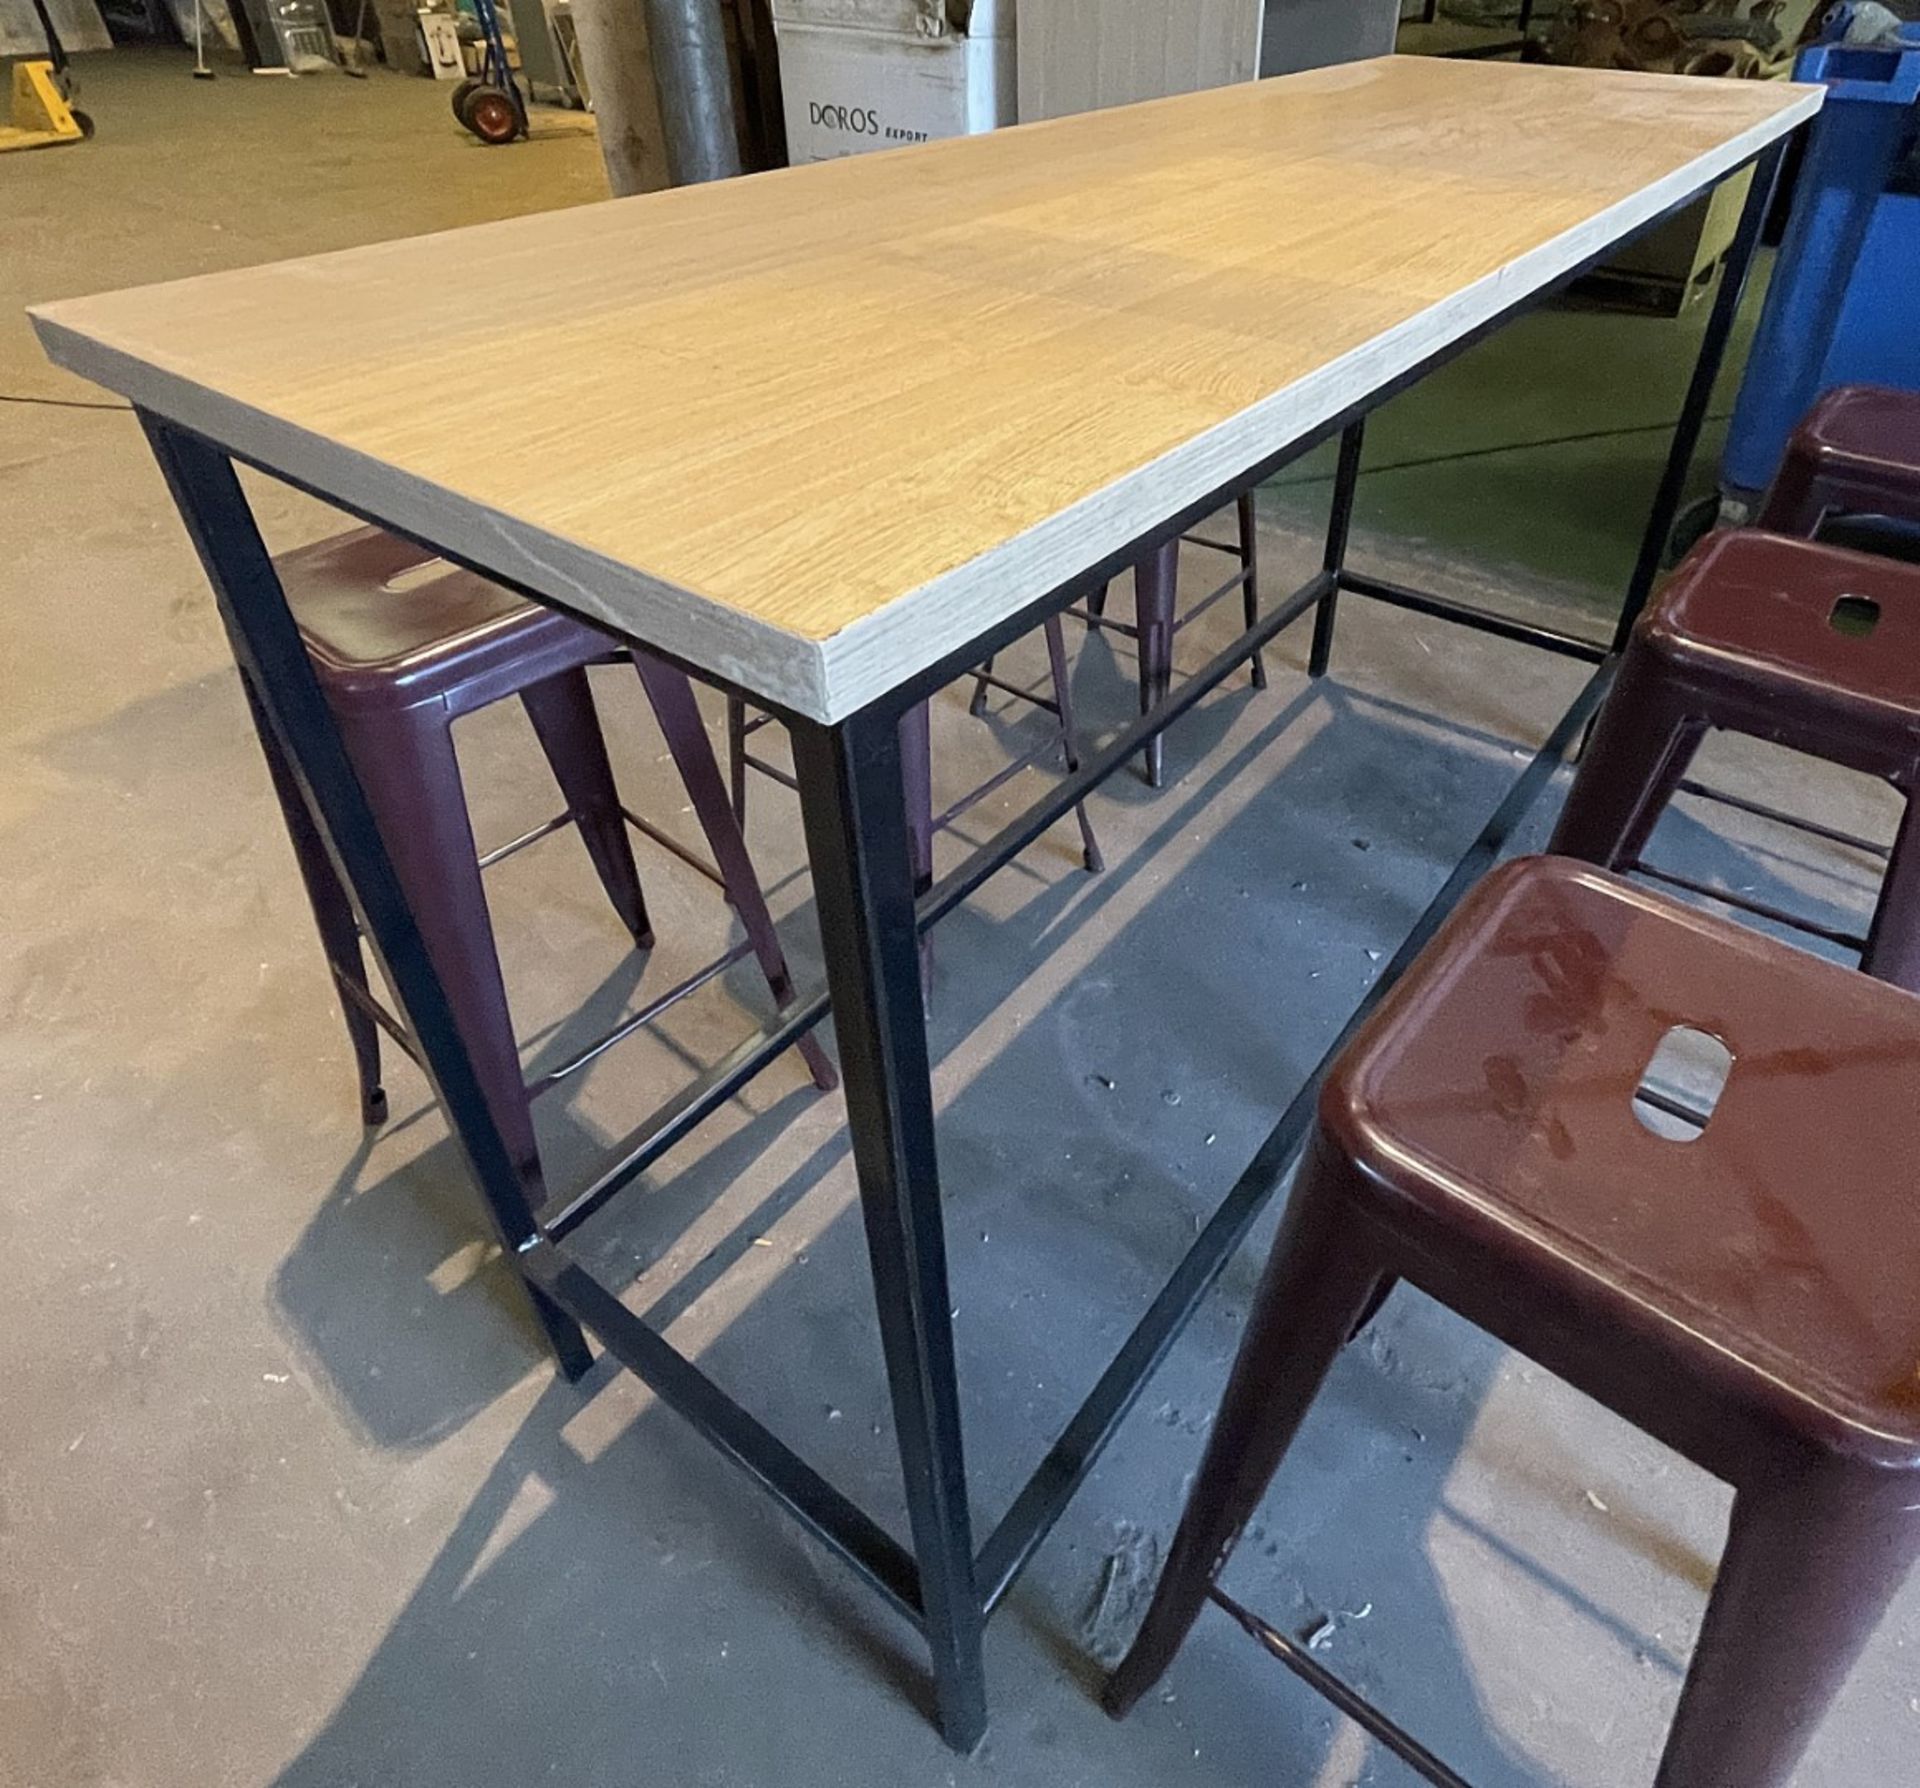 1 x Rectangular Bar Table And 6 x Metal Bar Stools - Ref: FGN068 - CL834 - Location: Essex, RM19 Dim - Image 7 of 9